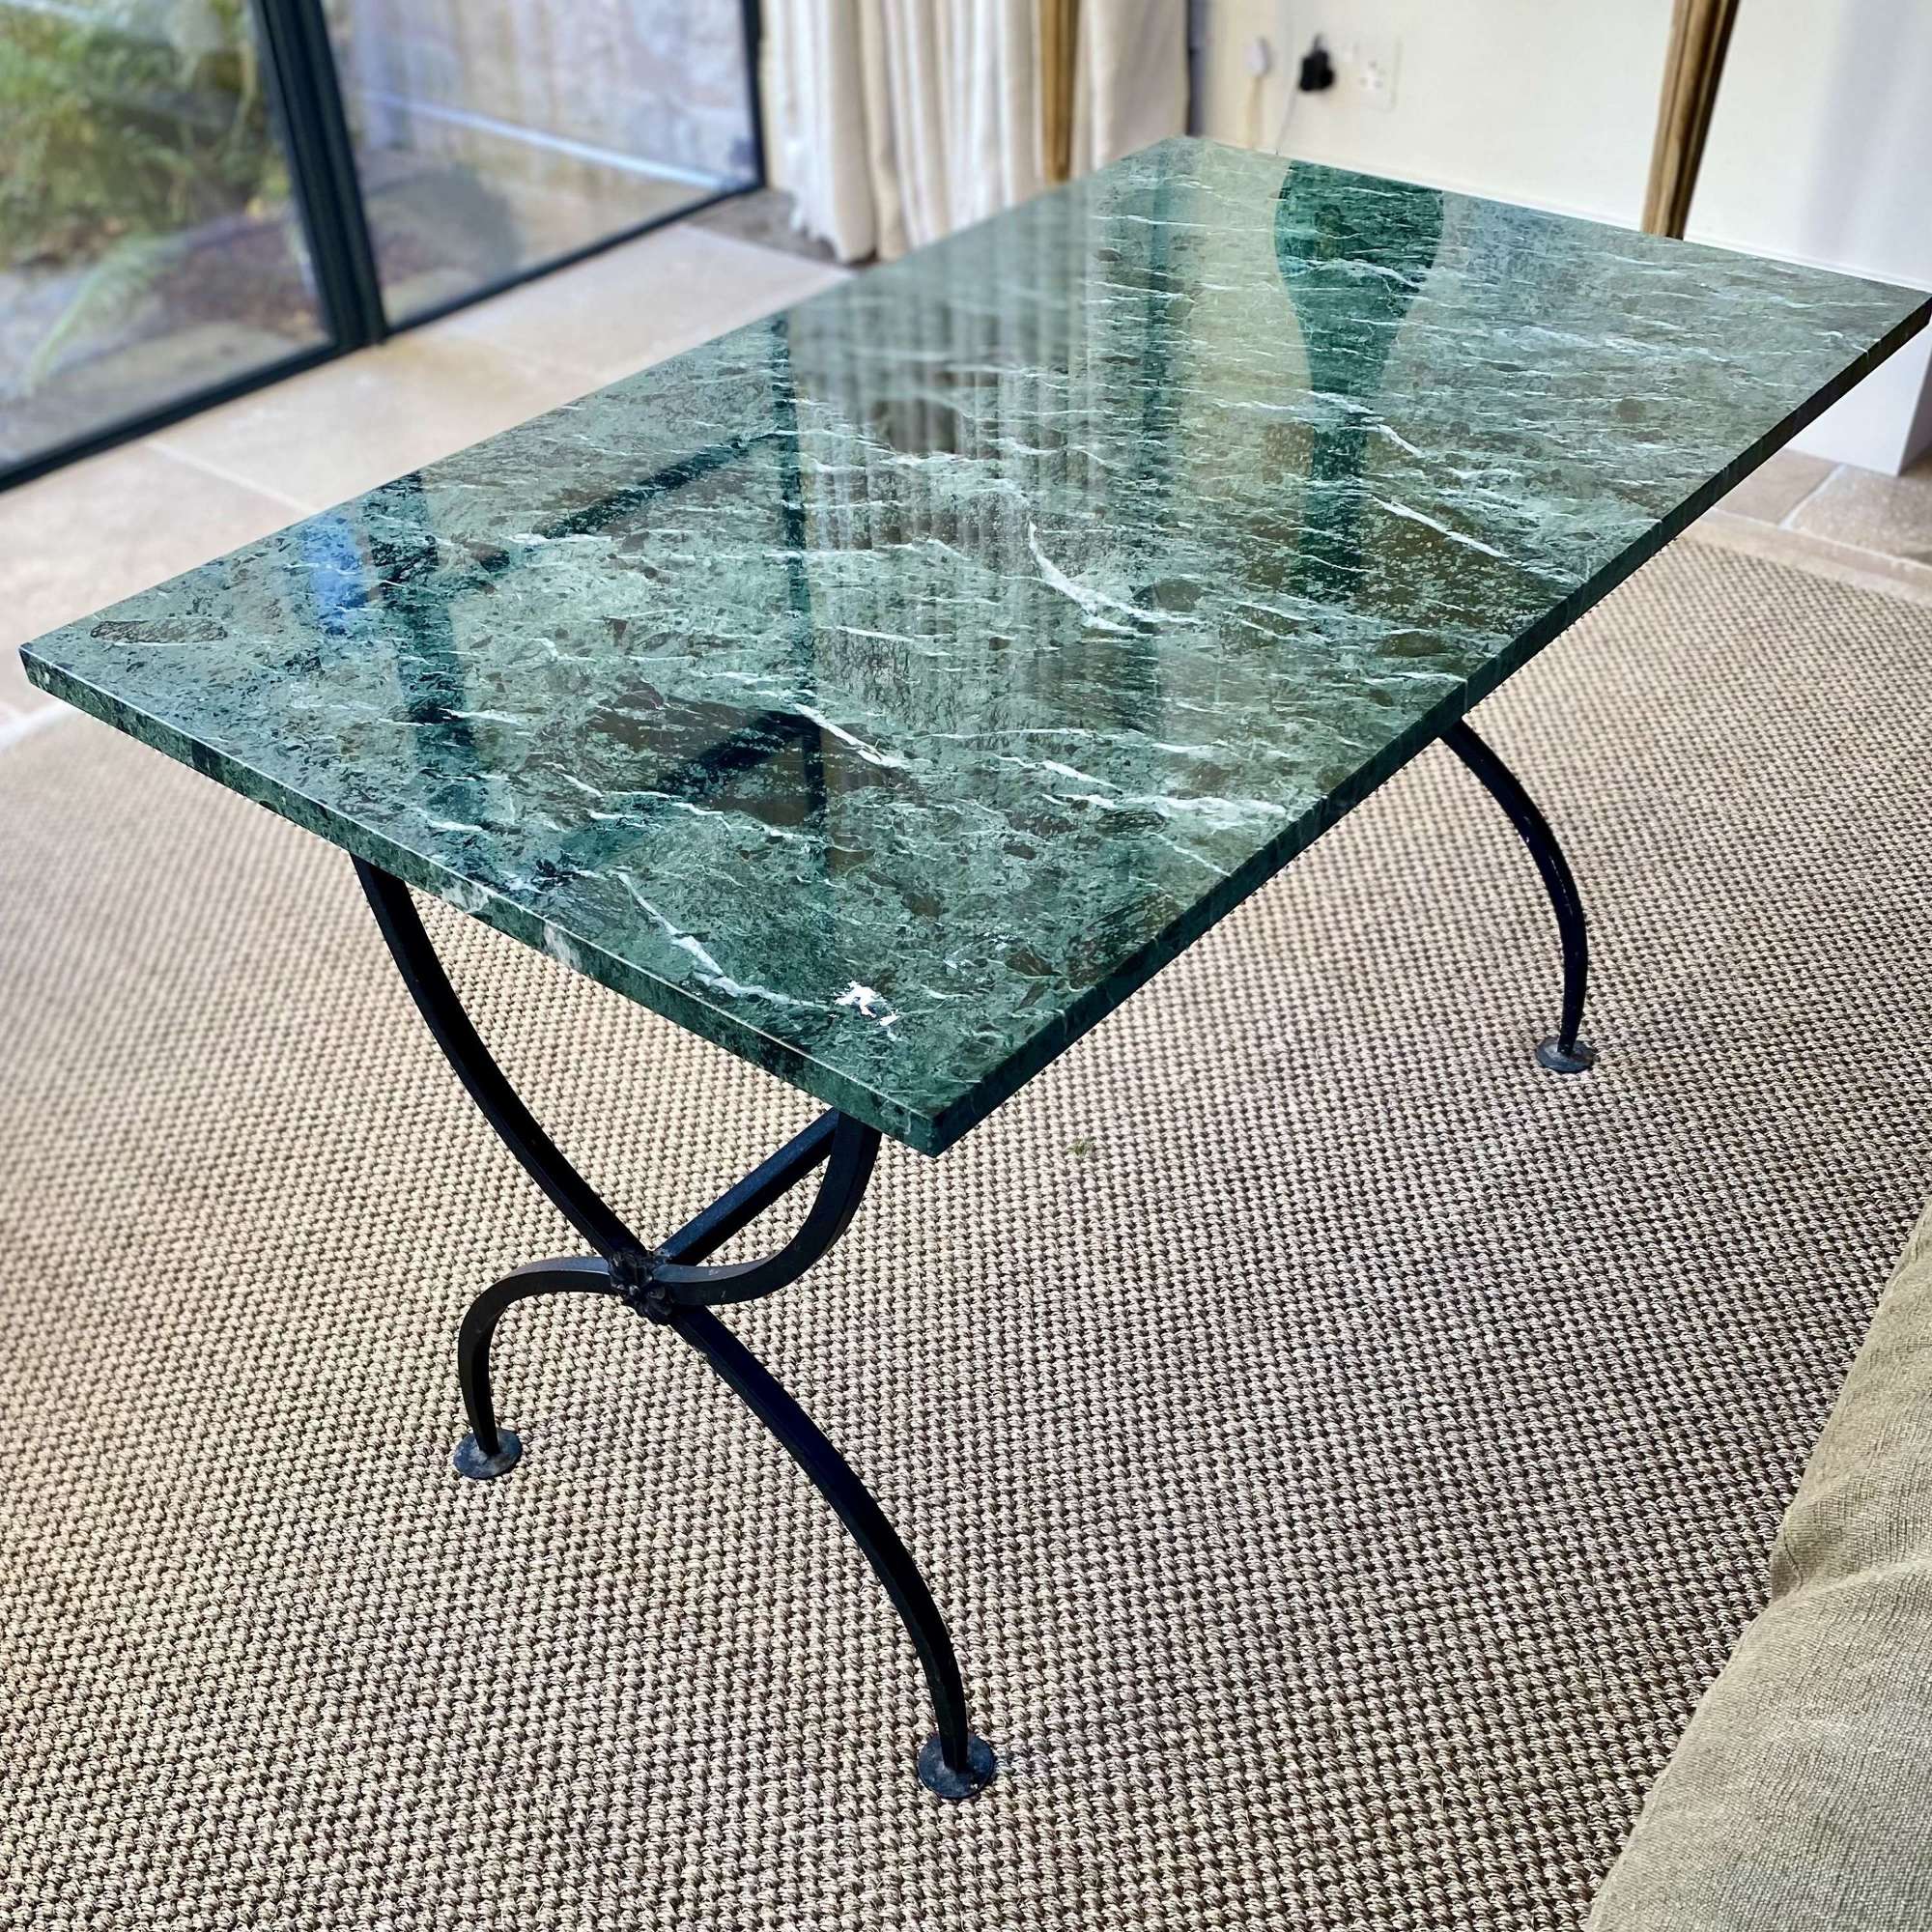 Mid 20th Century green marble & wrought iron table